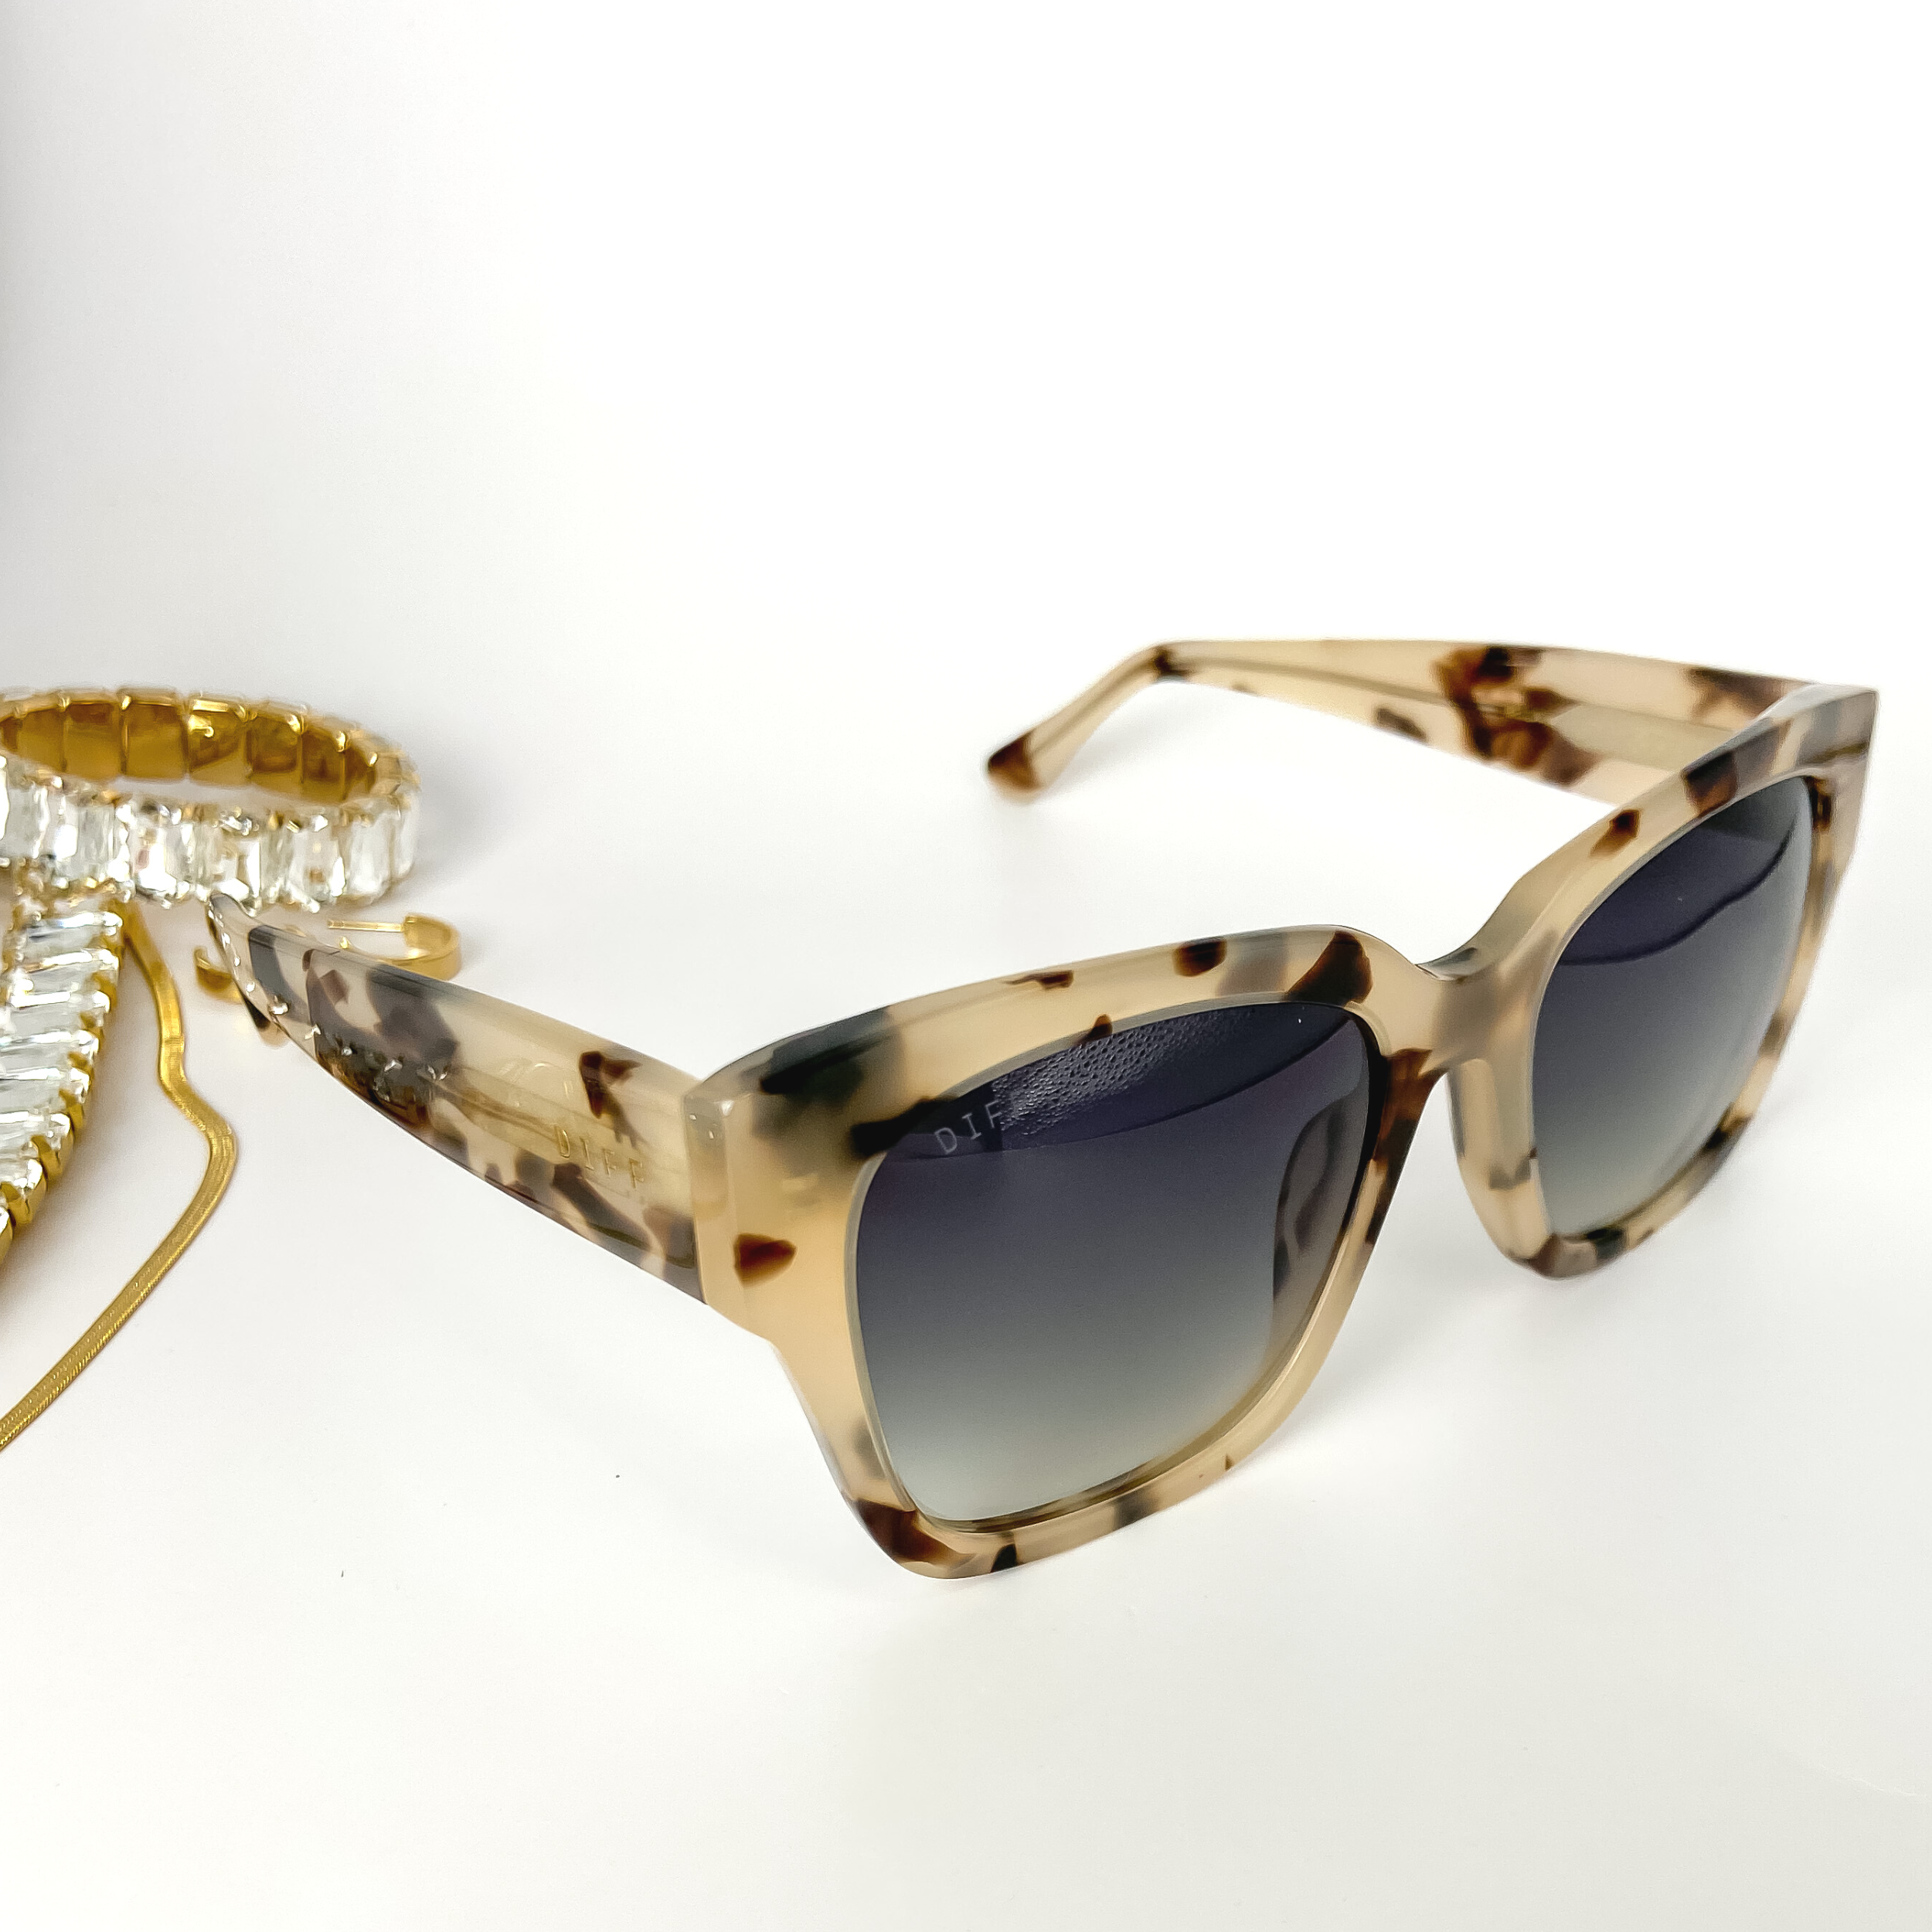 A pair of cream tortoise-print square sunglasses with grey fade lenses pictured open on a white background with gold jewelry.